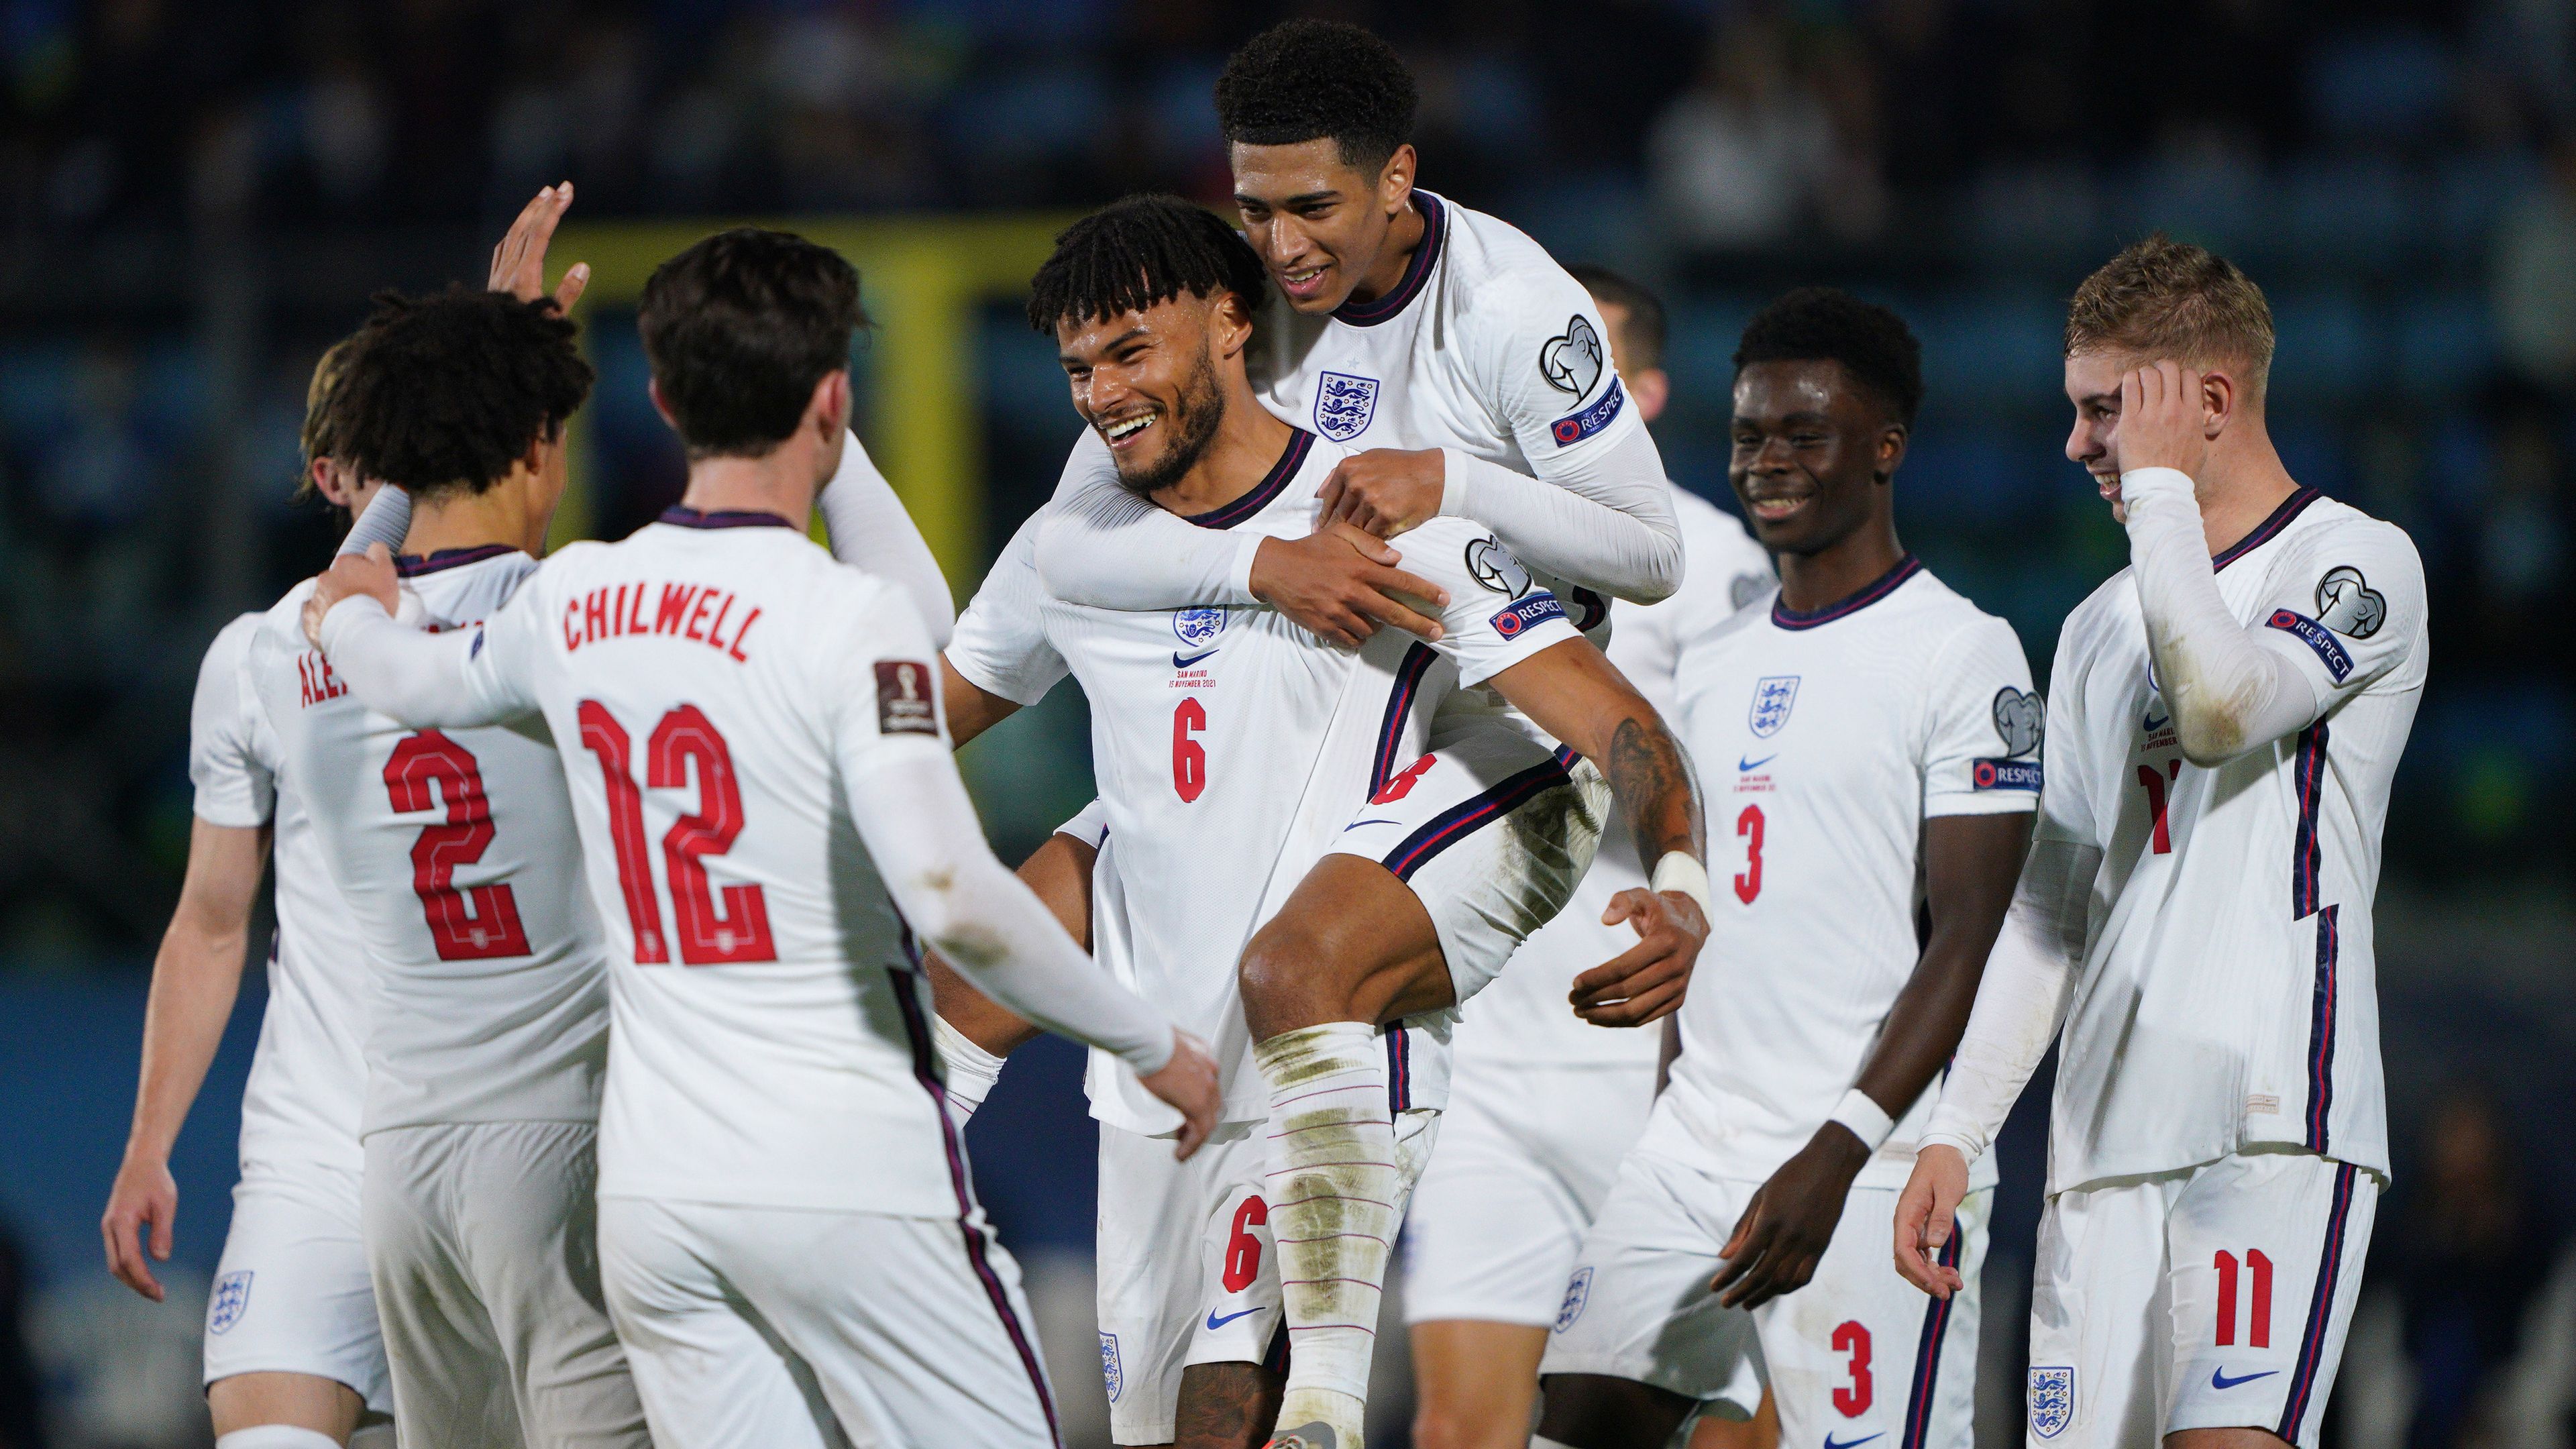 Tyrone Mings of England celebrate with his teammates after scoring a goal during the 2022 FIFA World Cup Qualifier match between San Marino.